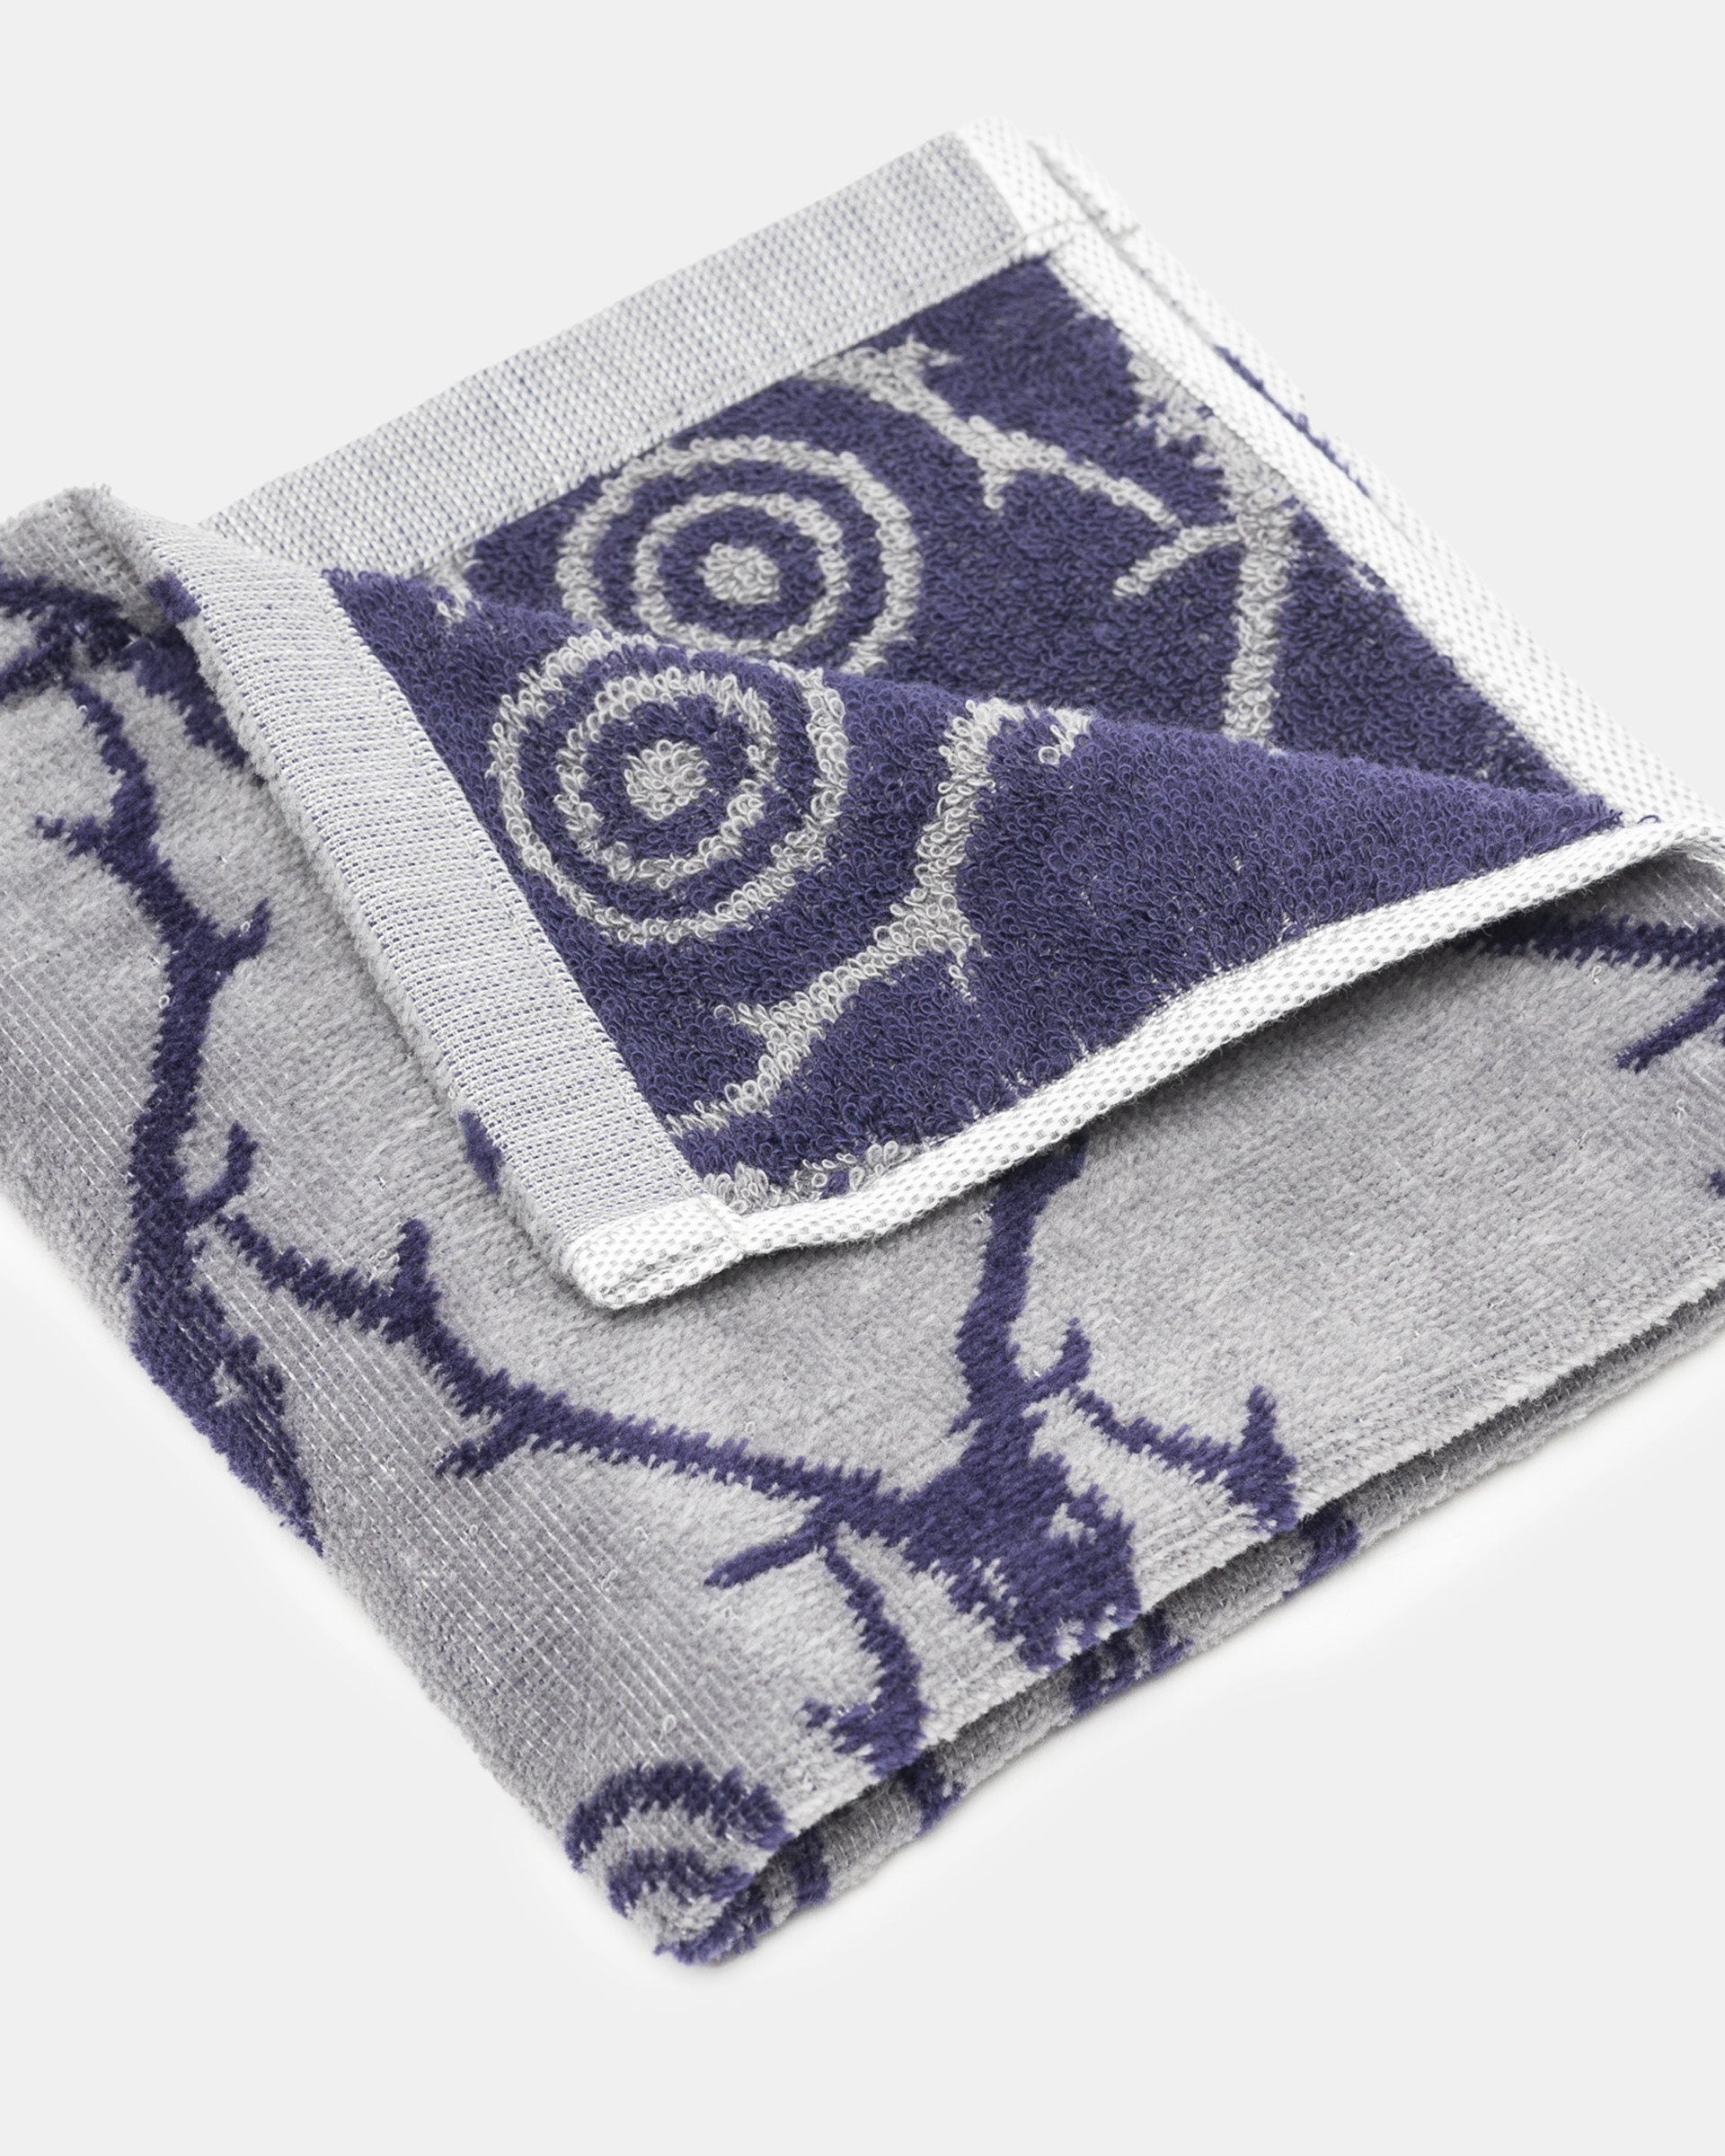 Wash Towel in Grey and Purple